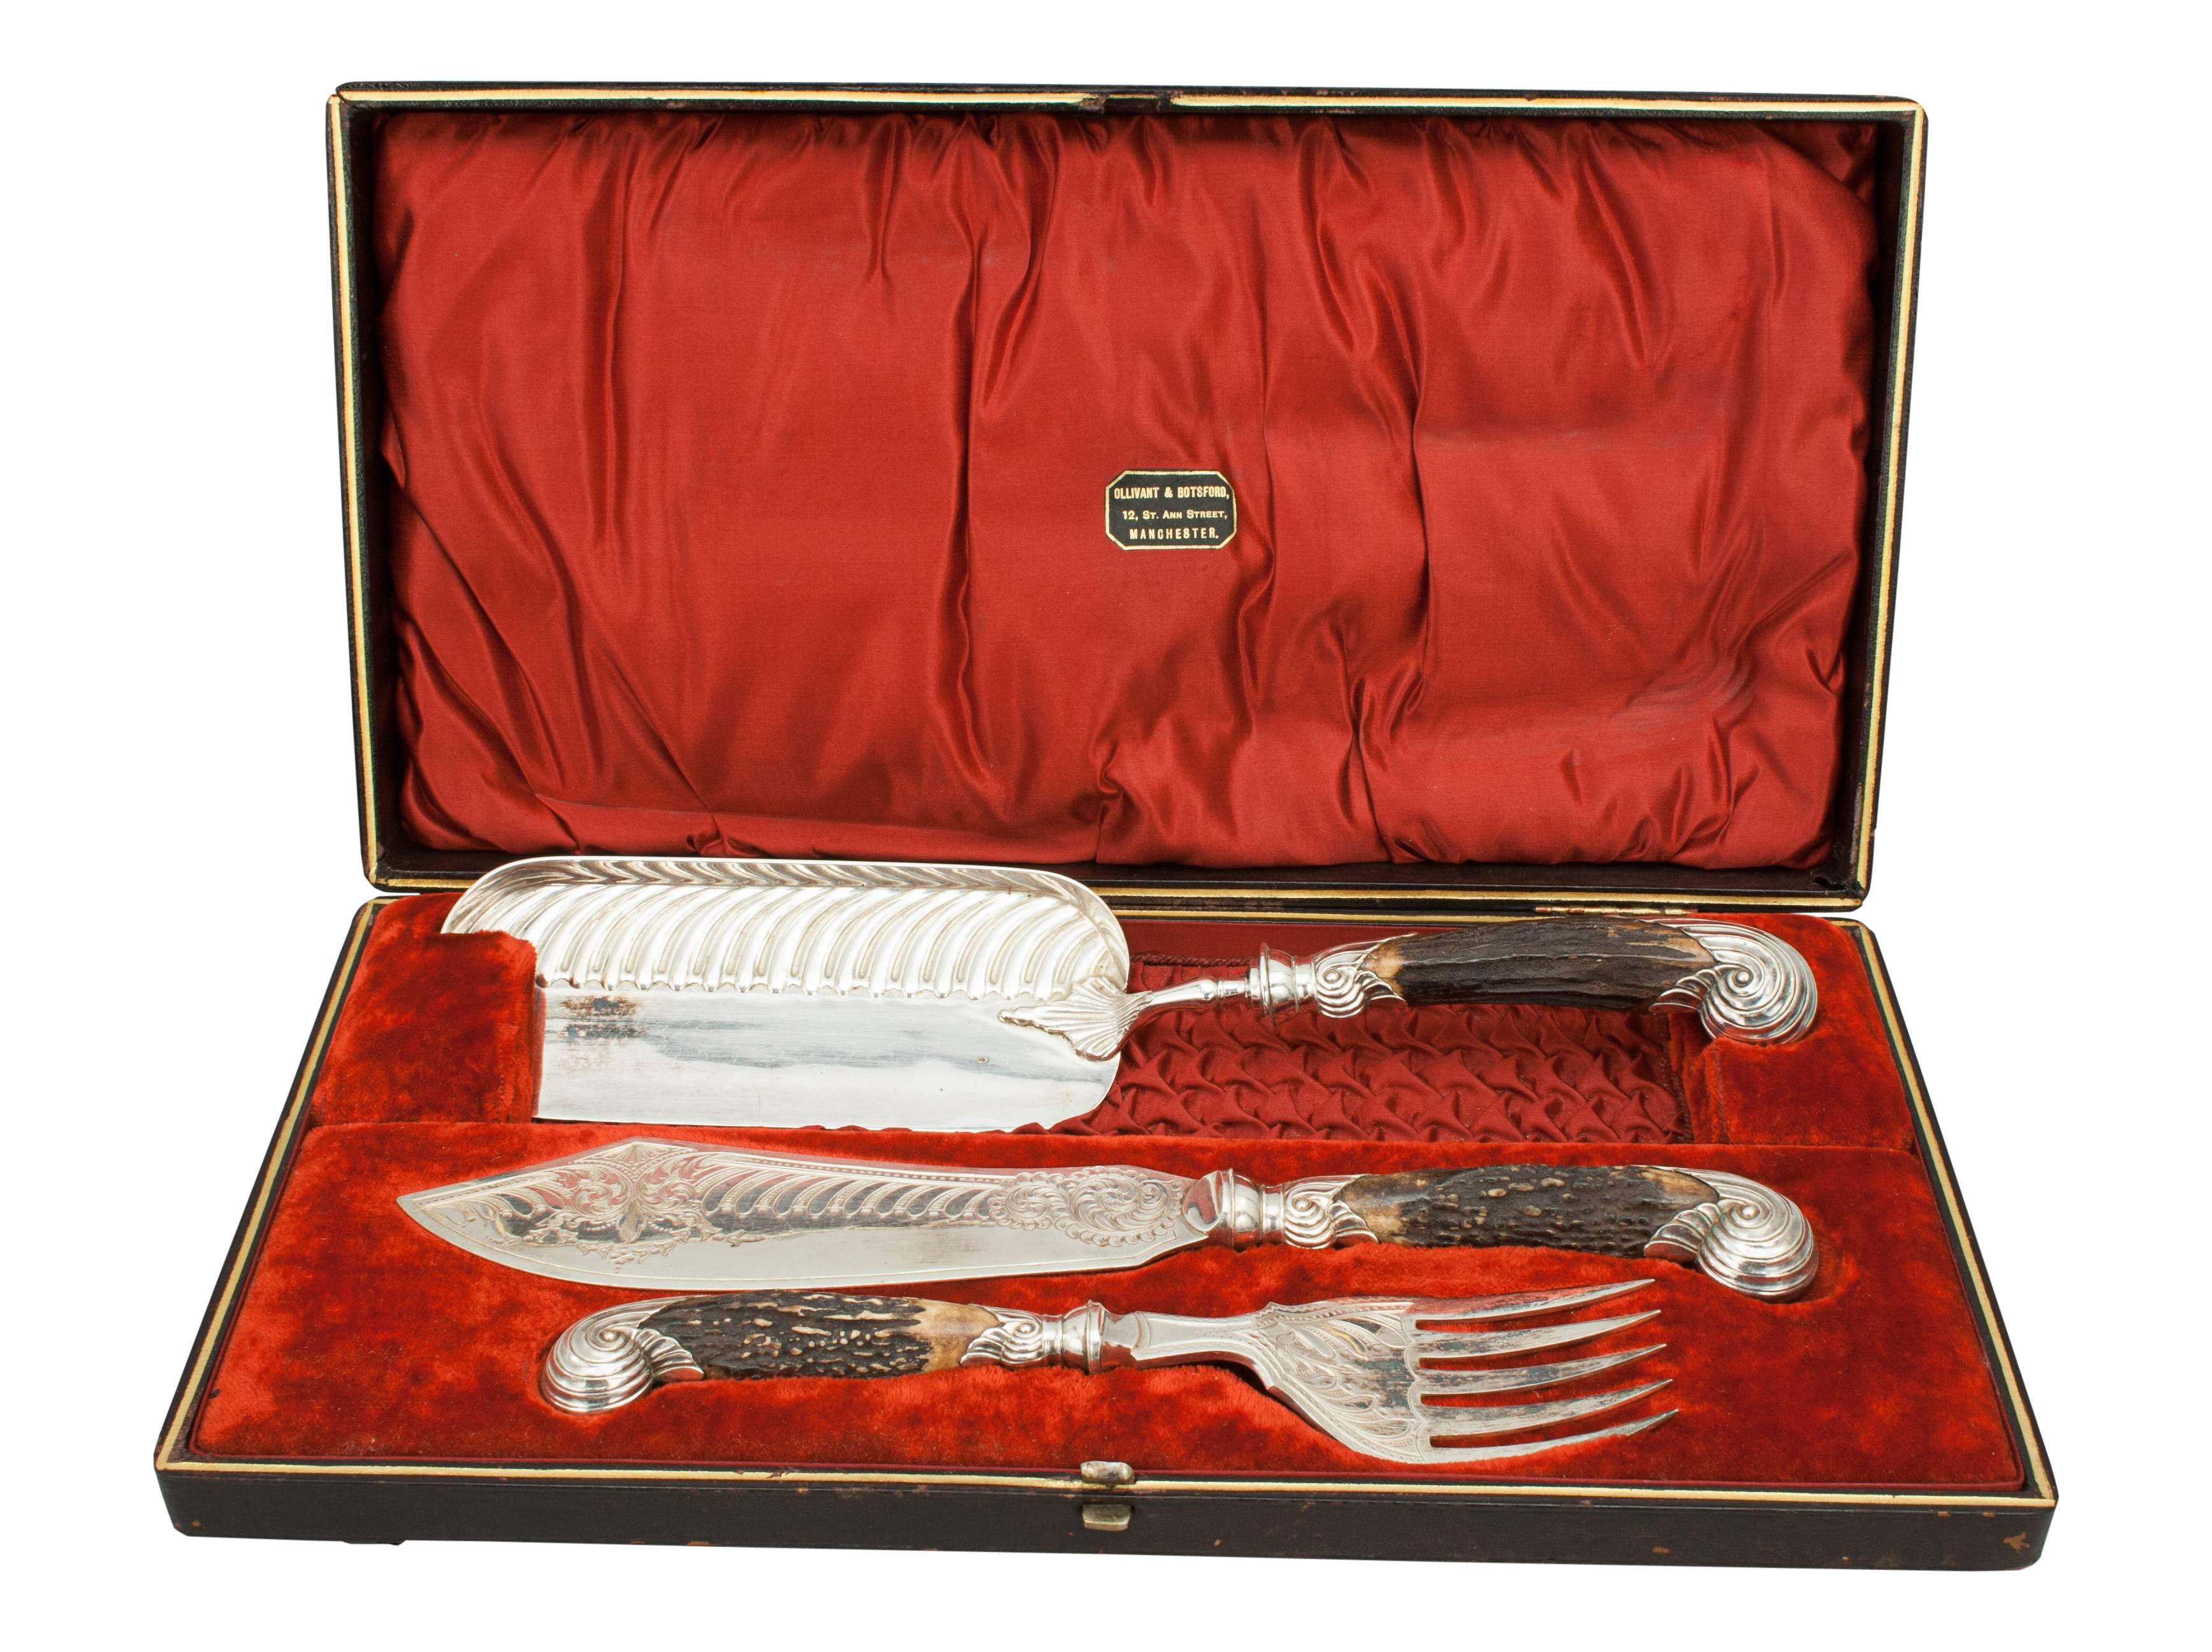 Antler handles with silver mounts
A wonderful Victorian, carving set in original box lined with red silk and crushed velvet lining. The set made from steel with Deer antler handles mounted with ornate silver fittings. 
A very good and rare